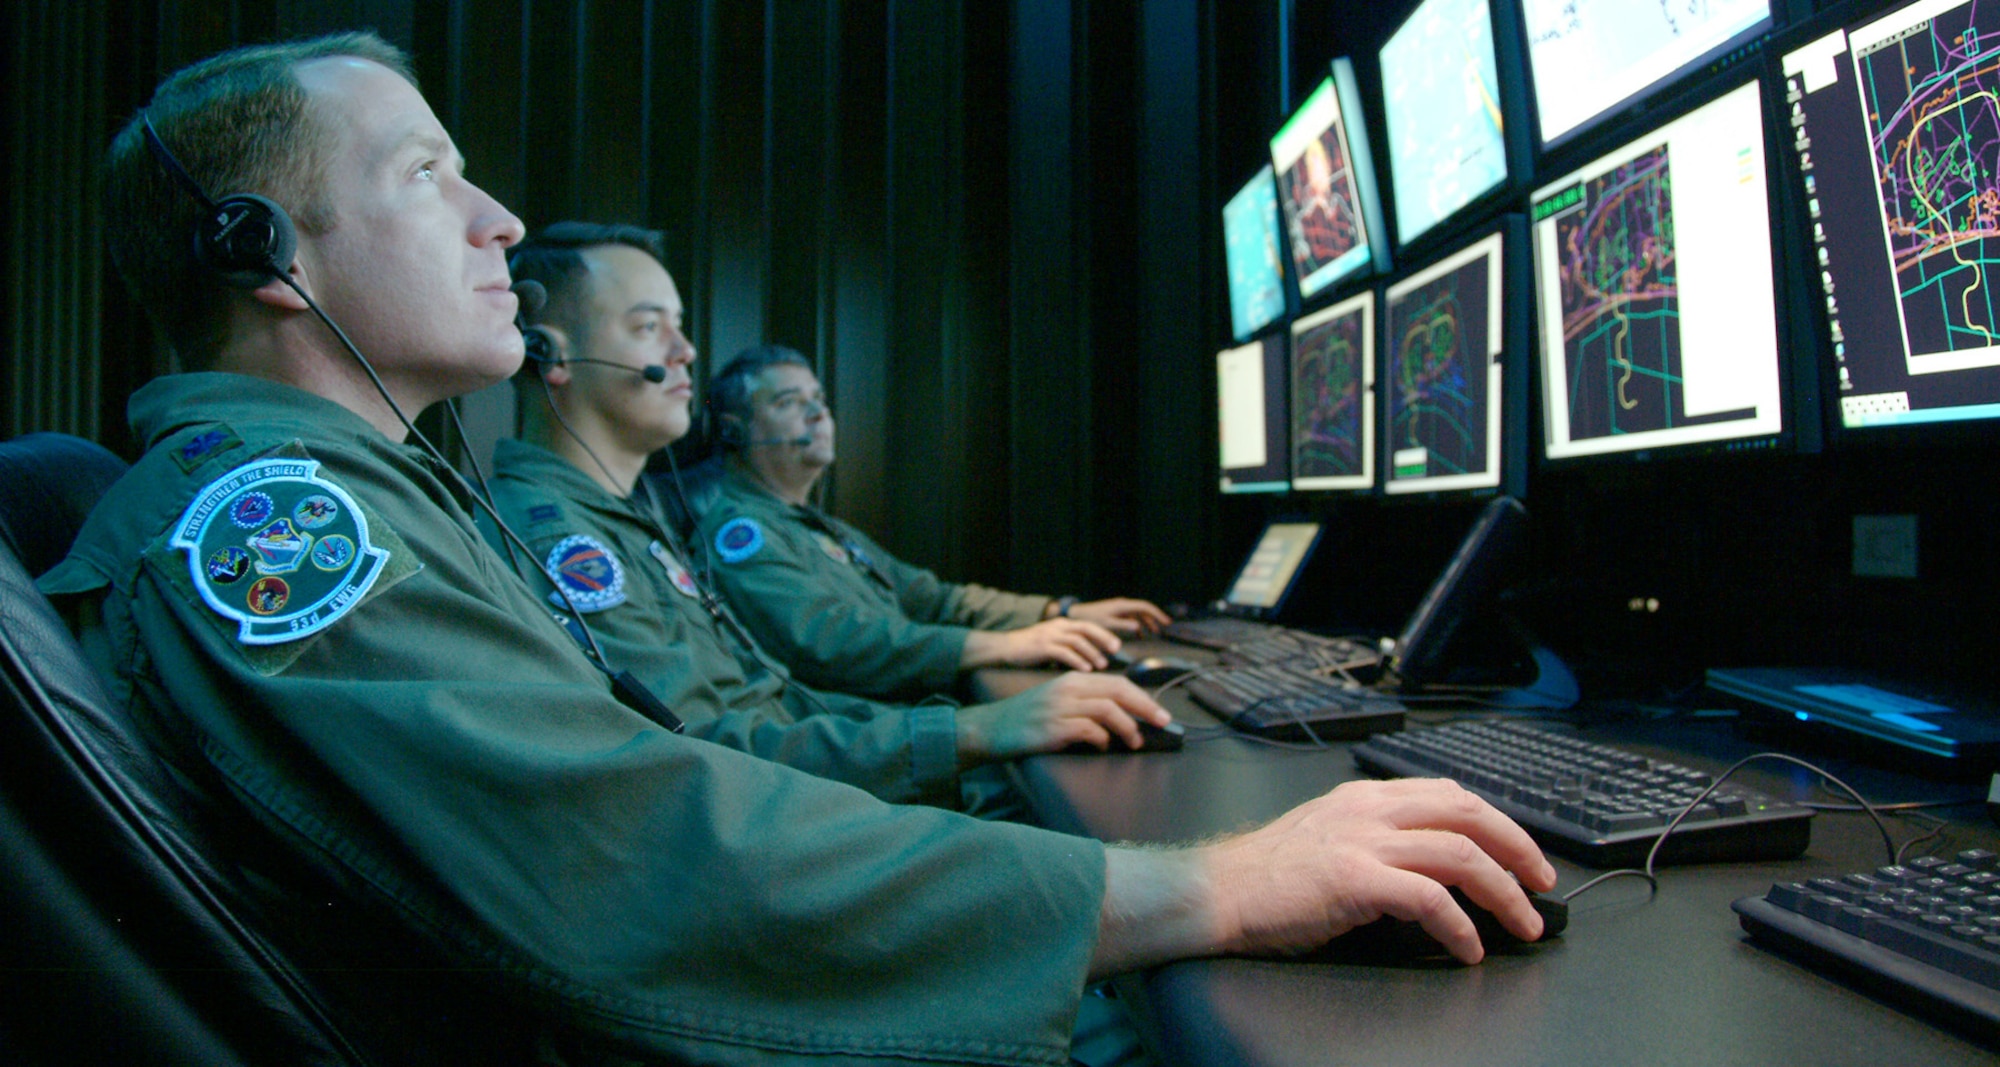 Lt. Col. Tim Sands (from left), Capt. Jon Smith and Lt. Col. John Arnold monitor a simulated test April 16 in the Central Control Facility at Eglin Air Force Base, Fla. They use the Central Control Facility to oversee electronic warfare mission data flight testing. Portions of their missions may expand under the new Air Force Cyber Command. Colonel Sands is the 53th Electronic Warfare Group AFCYBER Transition Team Chief, Captain Smith is the 36th Electronic Warfare Squadron Suppression of Enemy Air Defensestest director, and Colonel Arnold is the 36th Electronic Warfare Squadron commander. (U.S. Air Force photo/Capt. Carrie Kessler)
